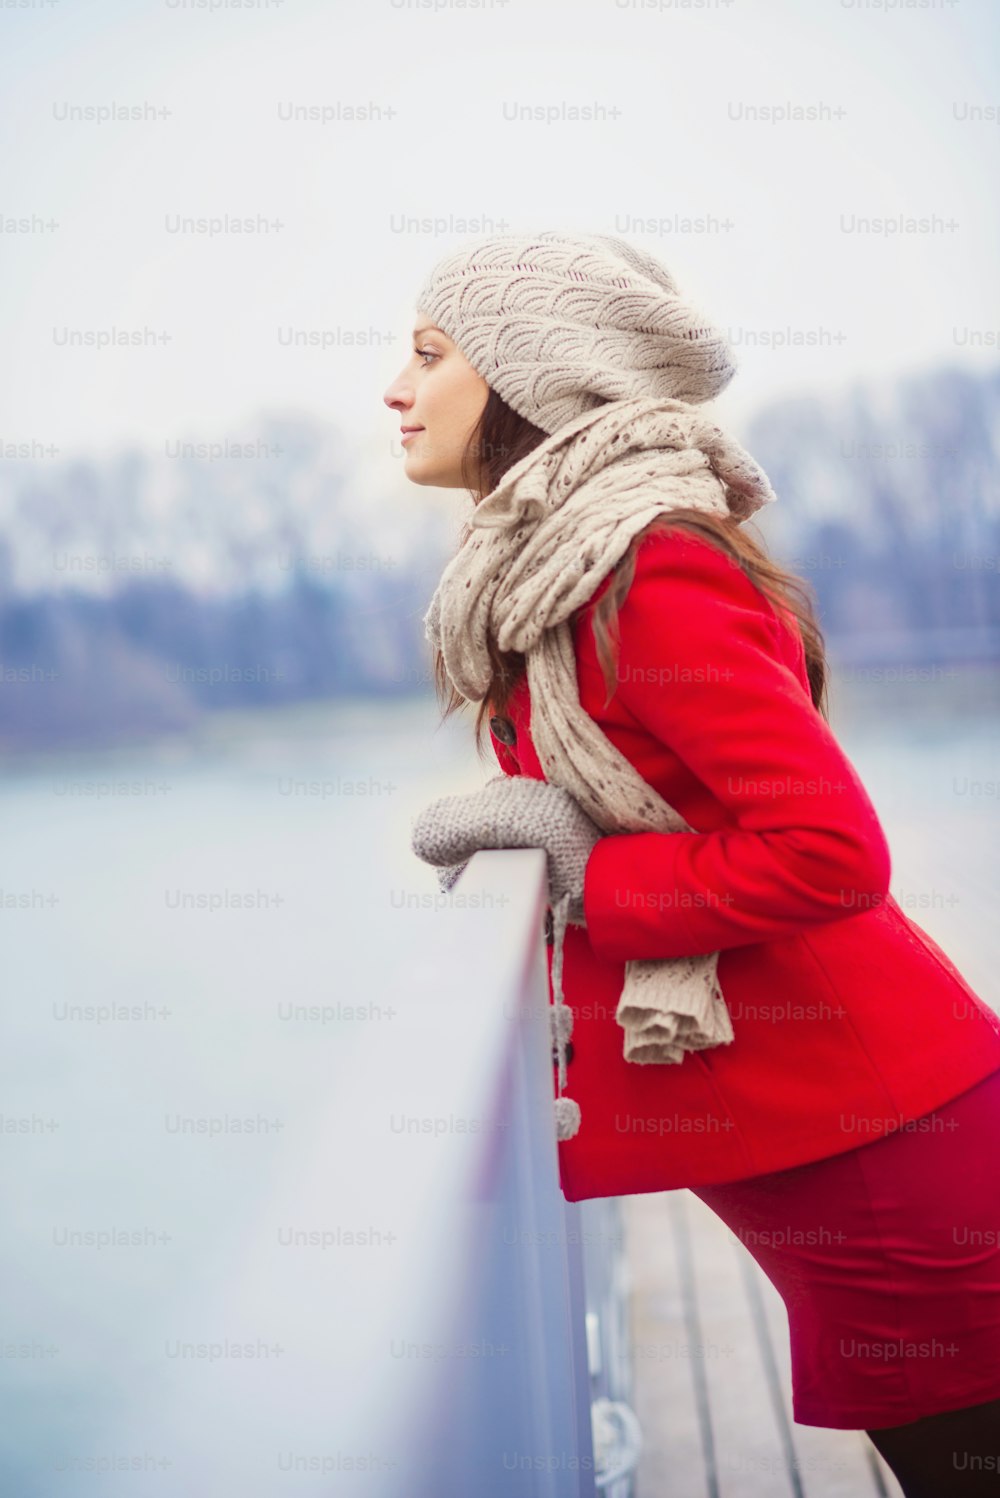 Winter outdoor portrait of pregnant woman in fashionable clothes standing by the river